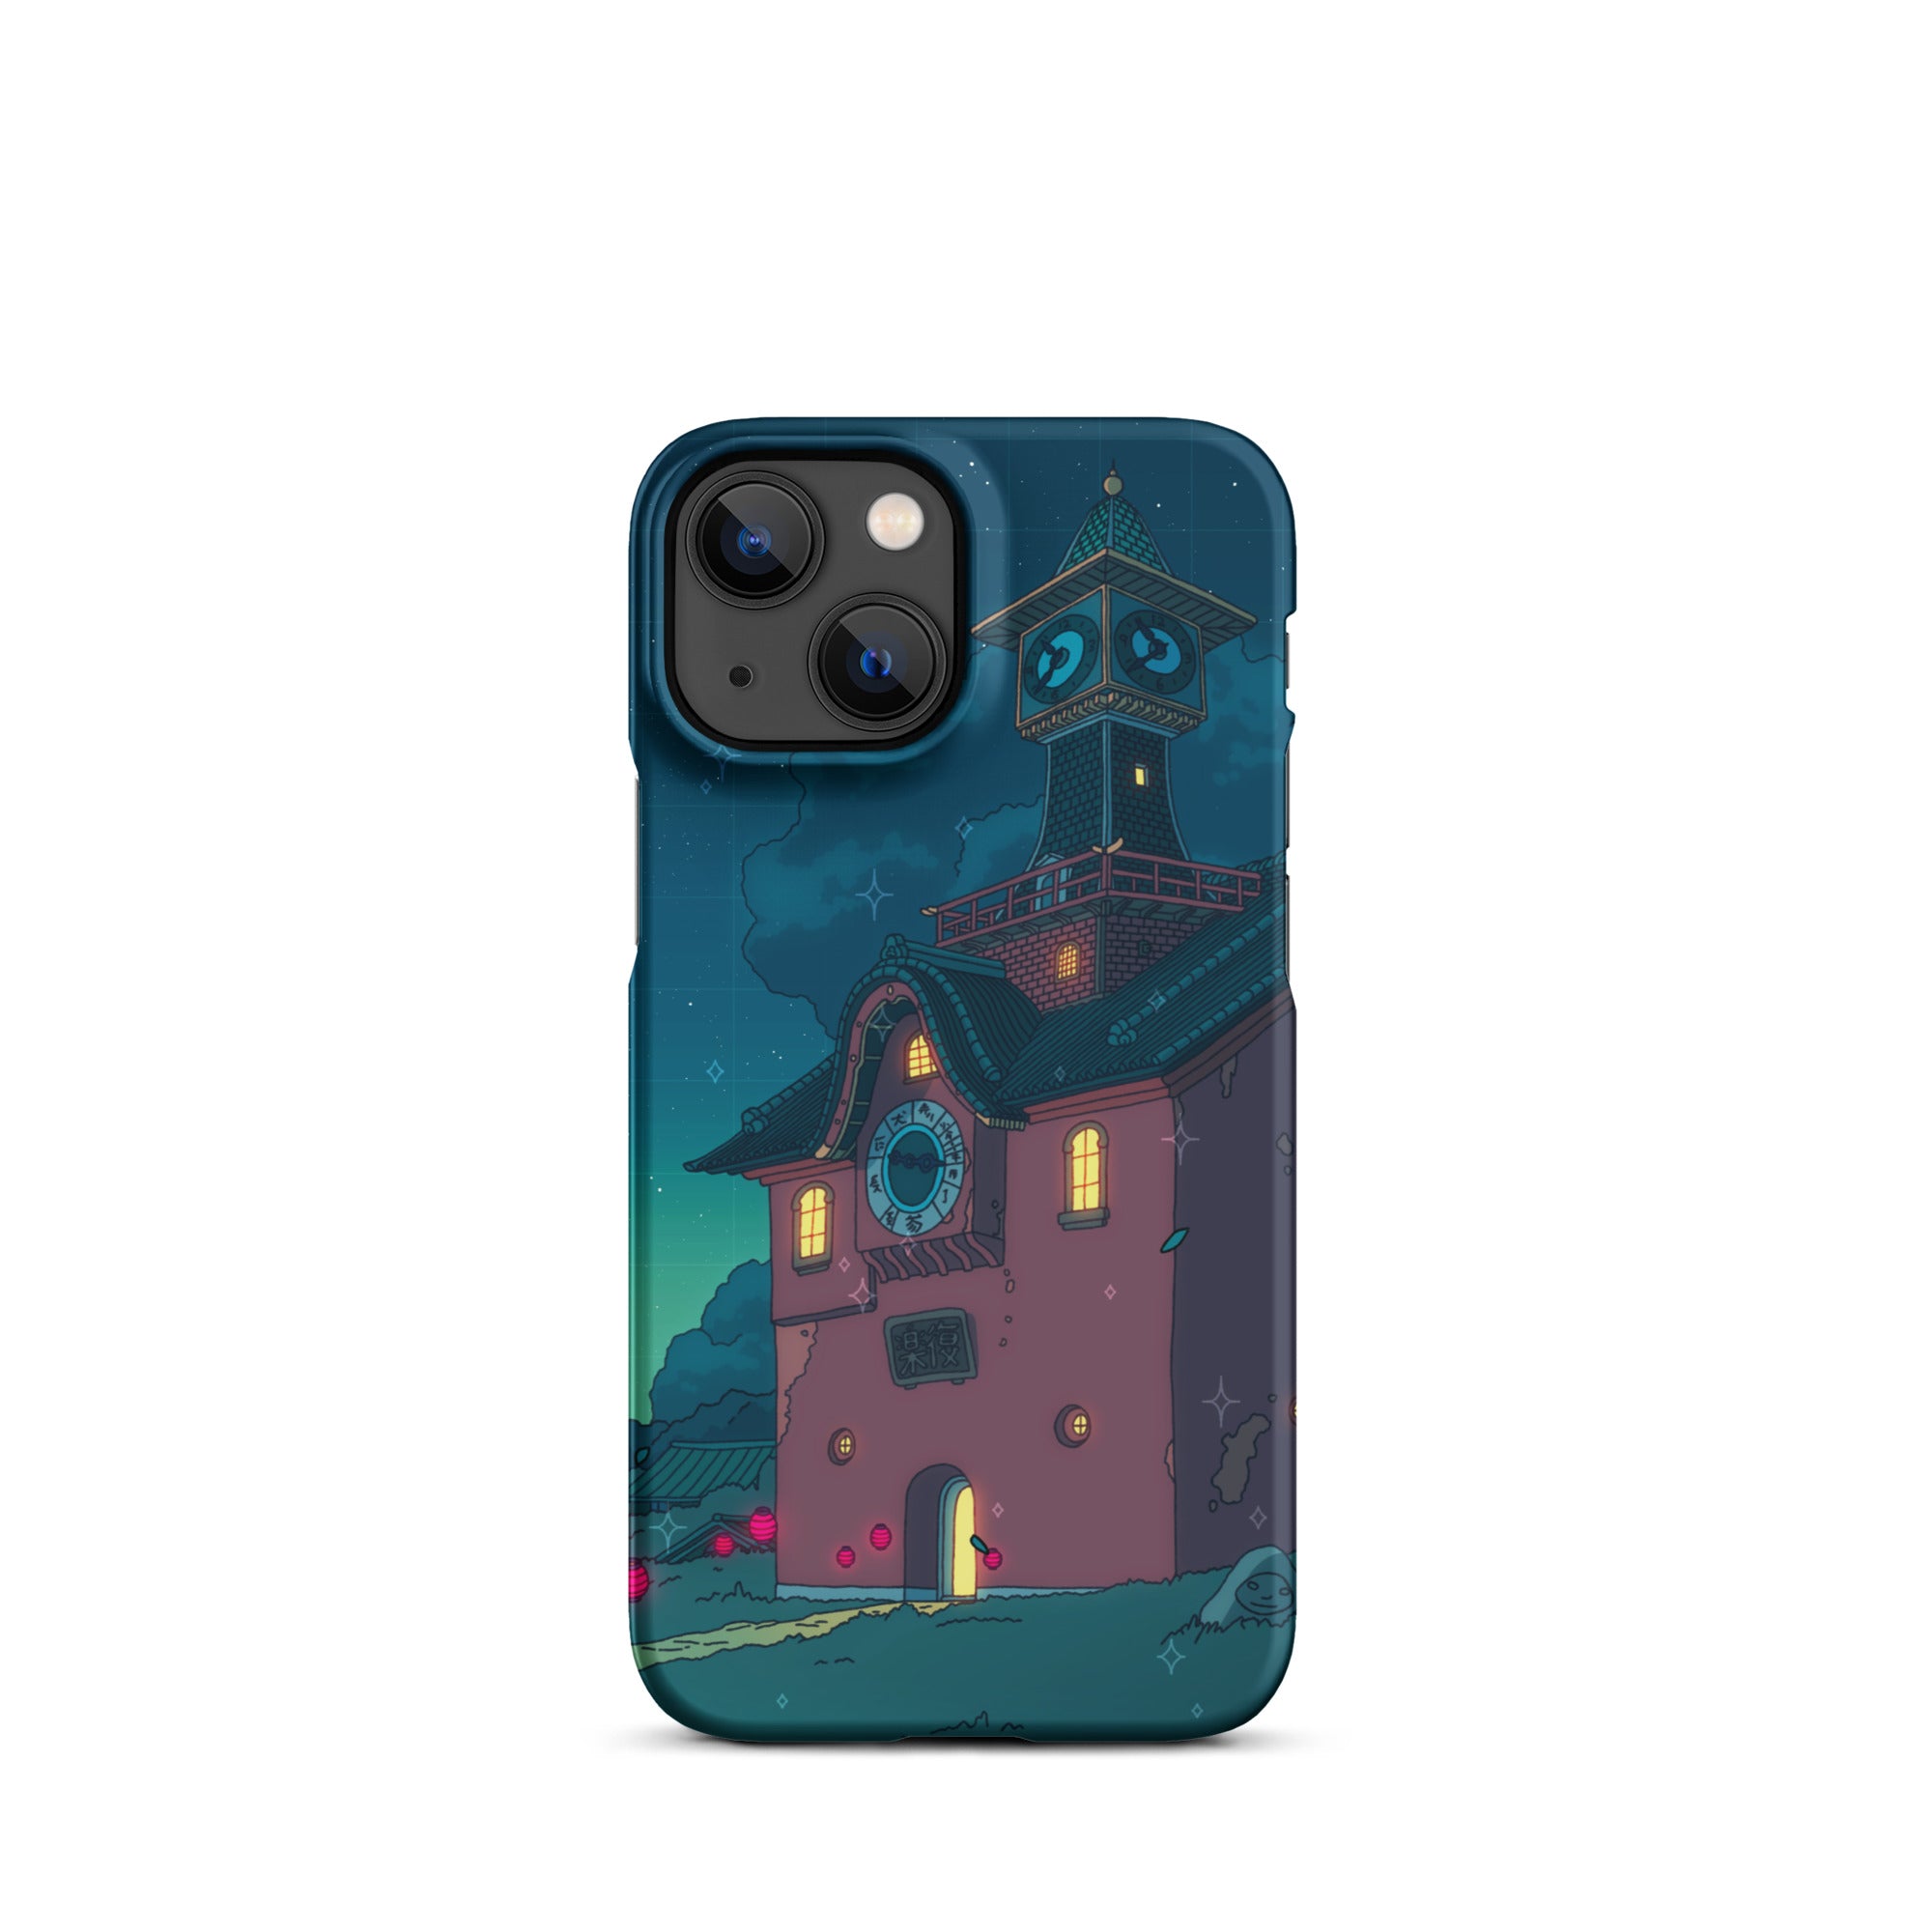 One Summer's Night iPhone Case